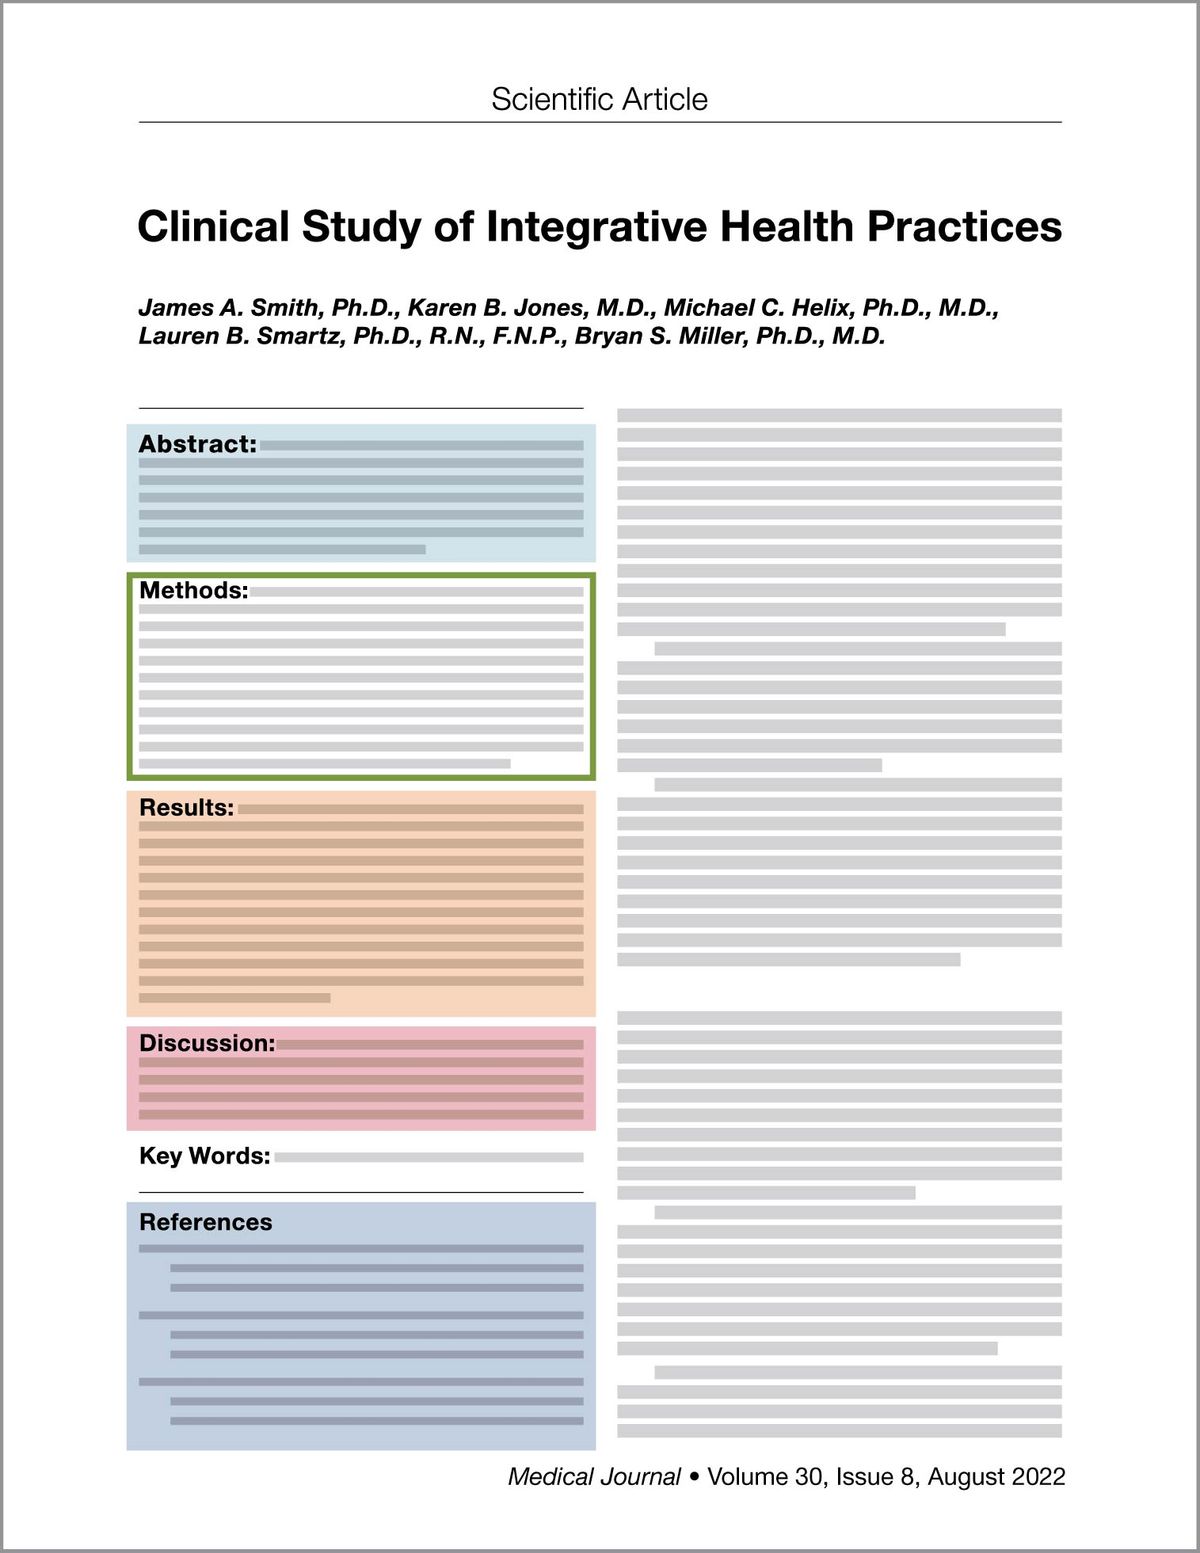 The words “Scientific Article” appear at the top of the page, with a fictional title, Clinical Study of Integrative Health Practices, below them. A fictional list of authors, James A. Smith, Ph.D., Karen B. Jones, M.D., Michael C. Helix, Ph.D., M.D., Lauren B. Smartz, Ph.D., R.N., F.N.P., Bryan S. Miller, Ph.D., M.D., appears under the title. The left column shows labeled sections of the journal article: Abstract, Methods, Results, Discussion, Key Words, References. All sections except Key Words are clickable. Gray lines appear in place of the text in each section in the left column and in the entire right column. These words appear at the lower right: Medical Journal Volume 30, Issue 8, August 2022